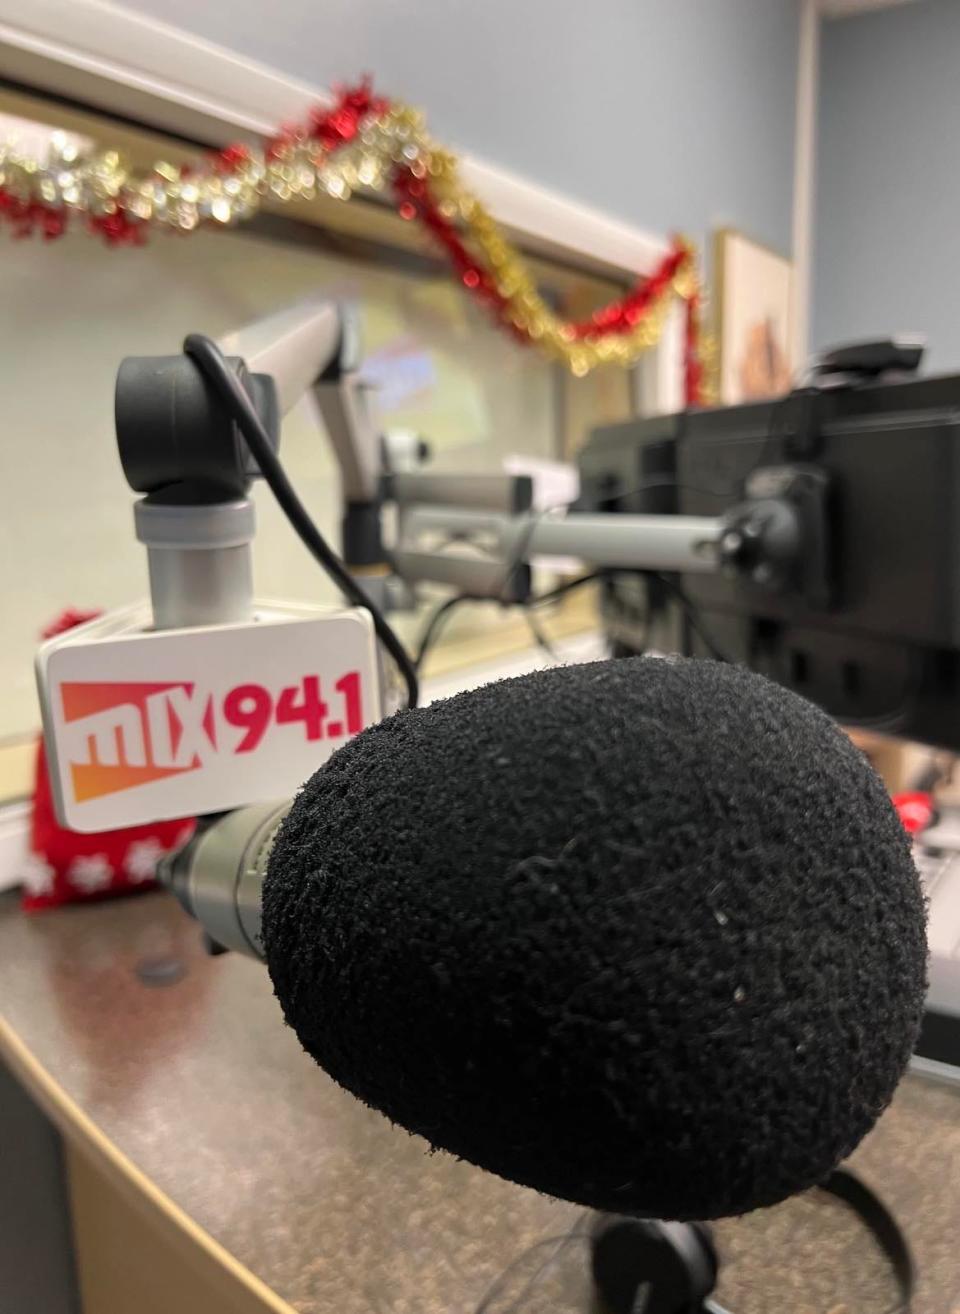 Mix 94.1 FM in Canton switched from a syndicated program to a local morning show in October. "Mix Mornings With Matt Fantone" is 6 to 10 a.m. Monday through Friday.